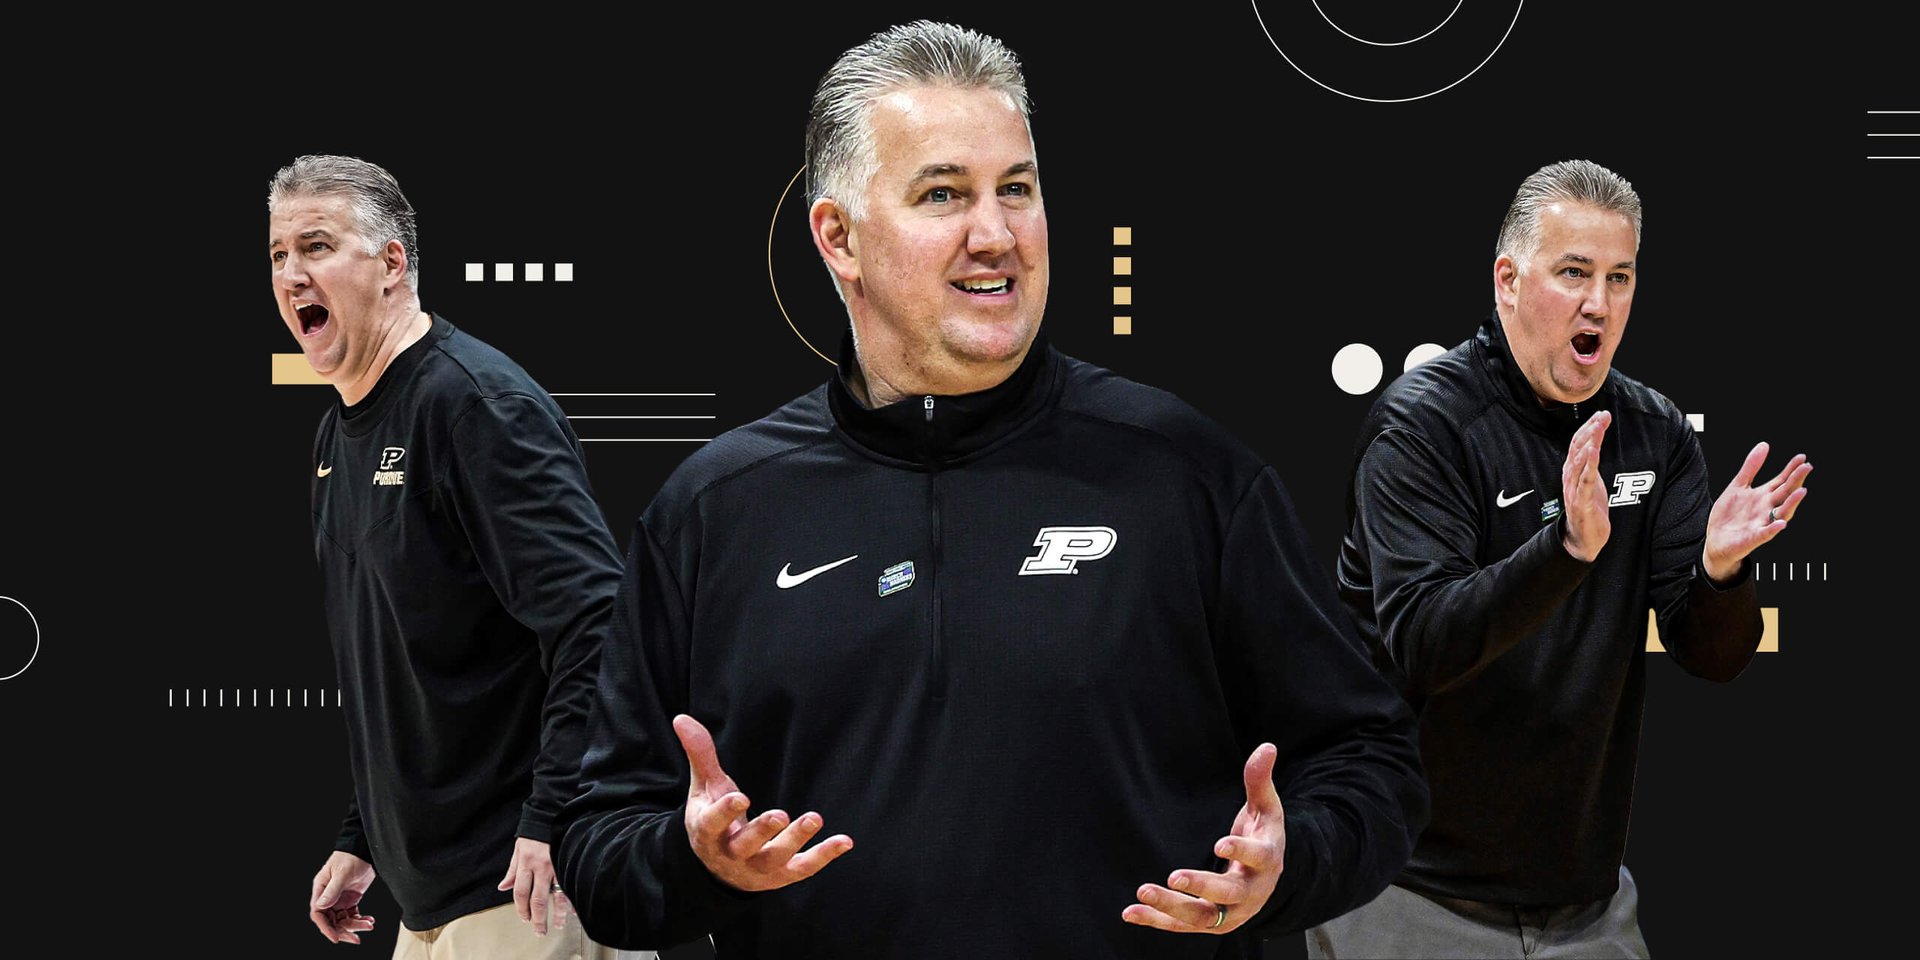 Is the beautiful mind of Purdue’s Matt Painter what college basketball needs?